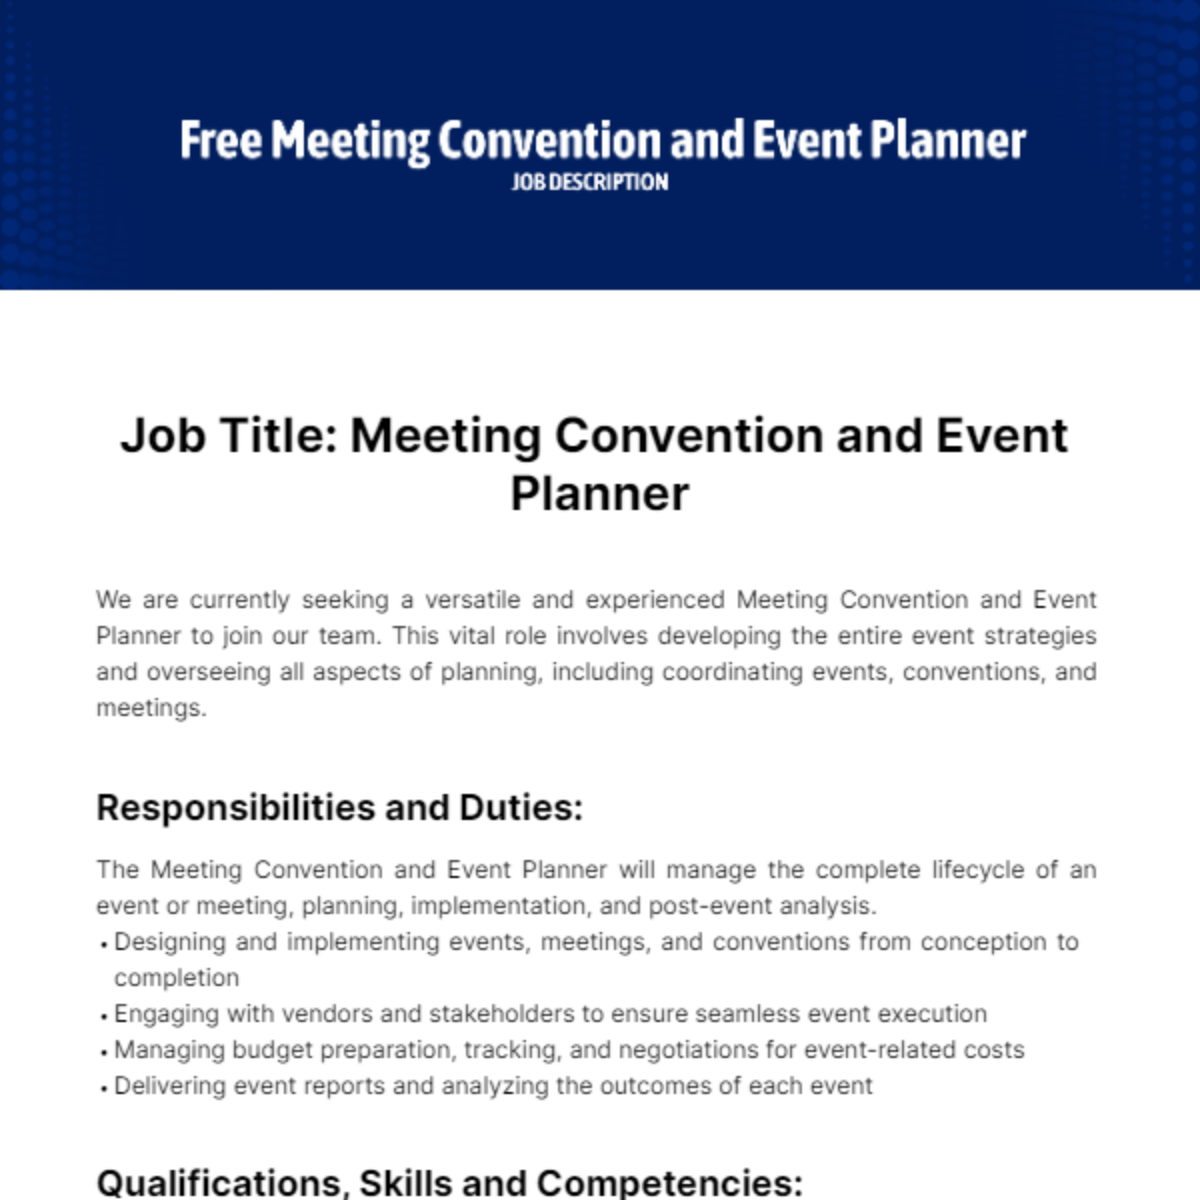 Meeting Convention and Event Planner Job Description Template